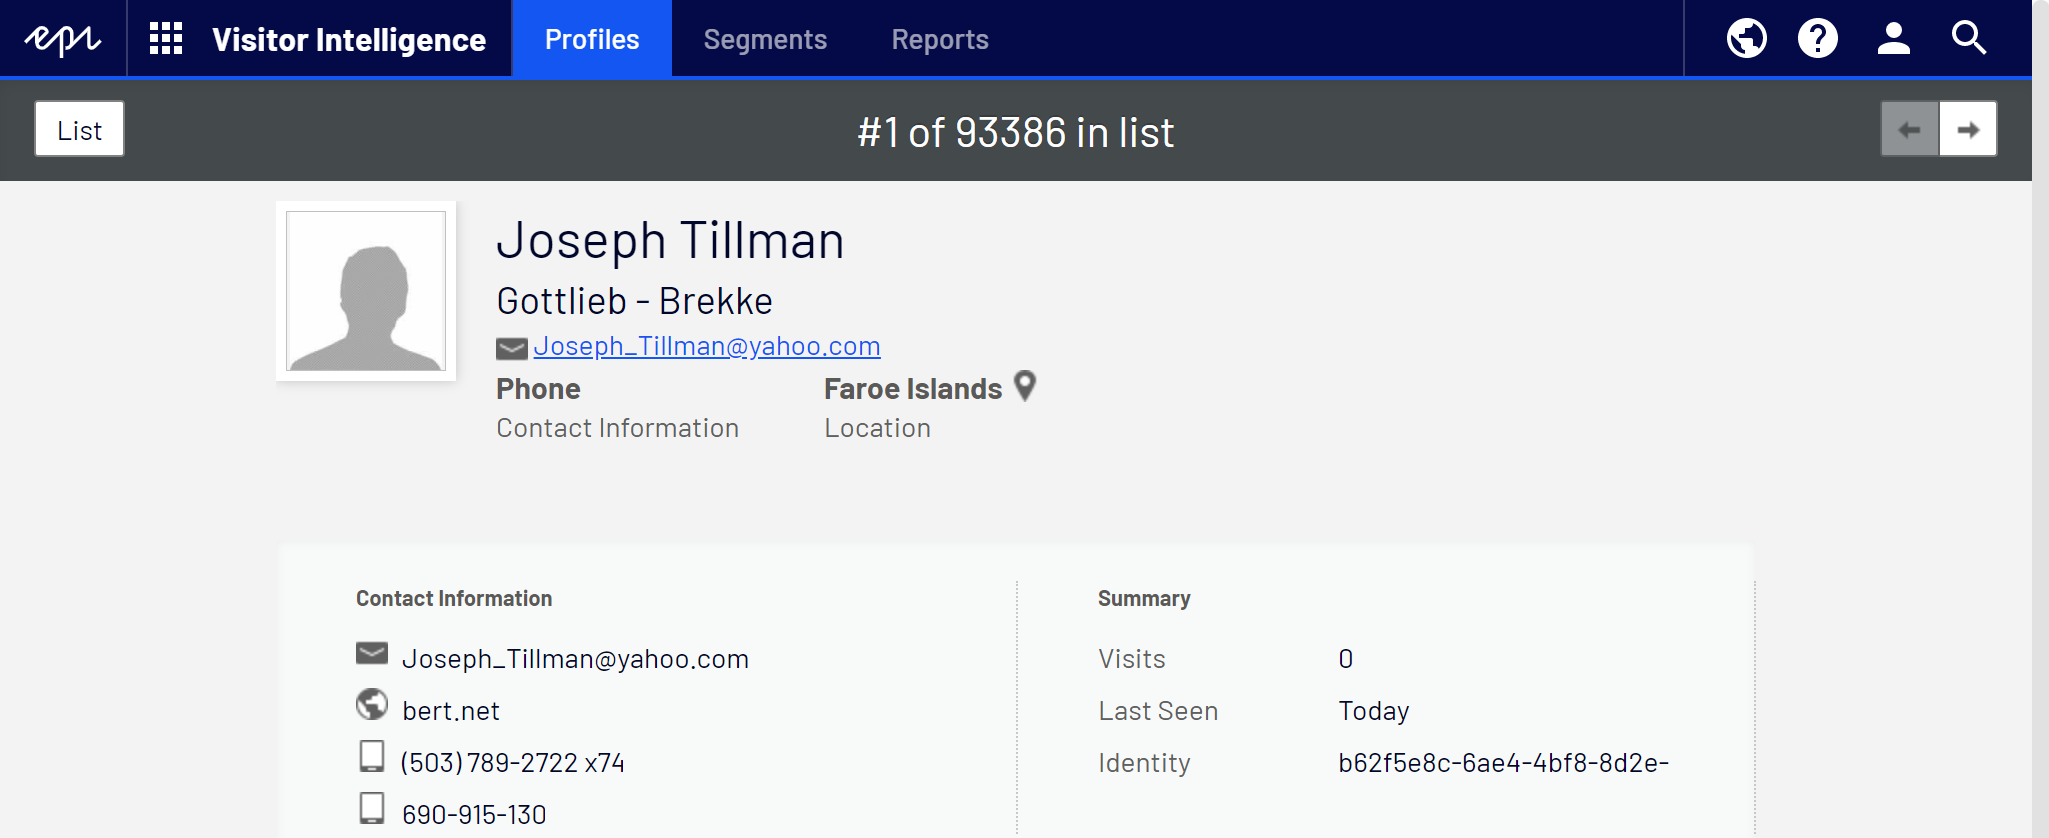 Image: Visitor profile example